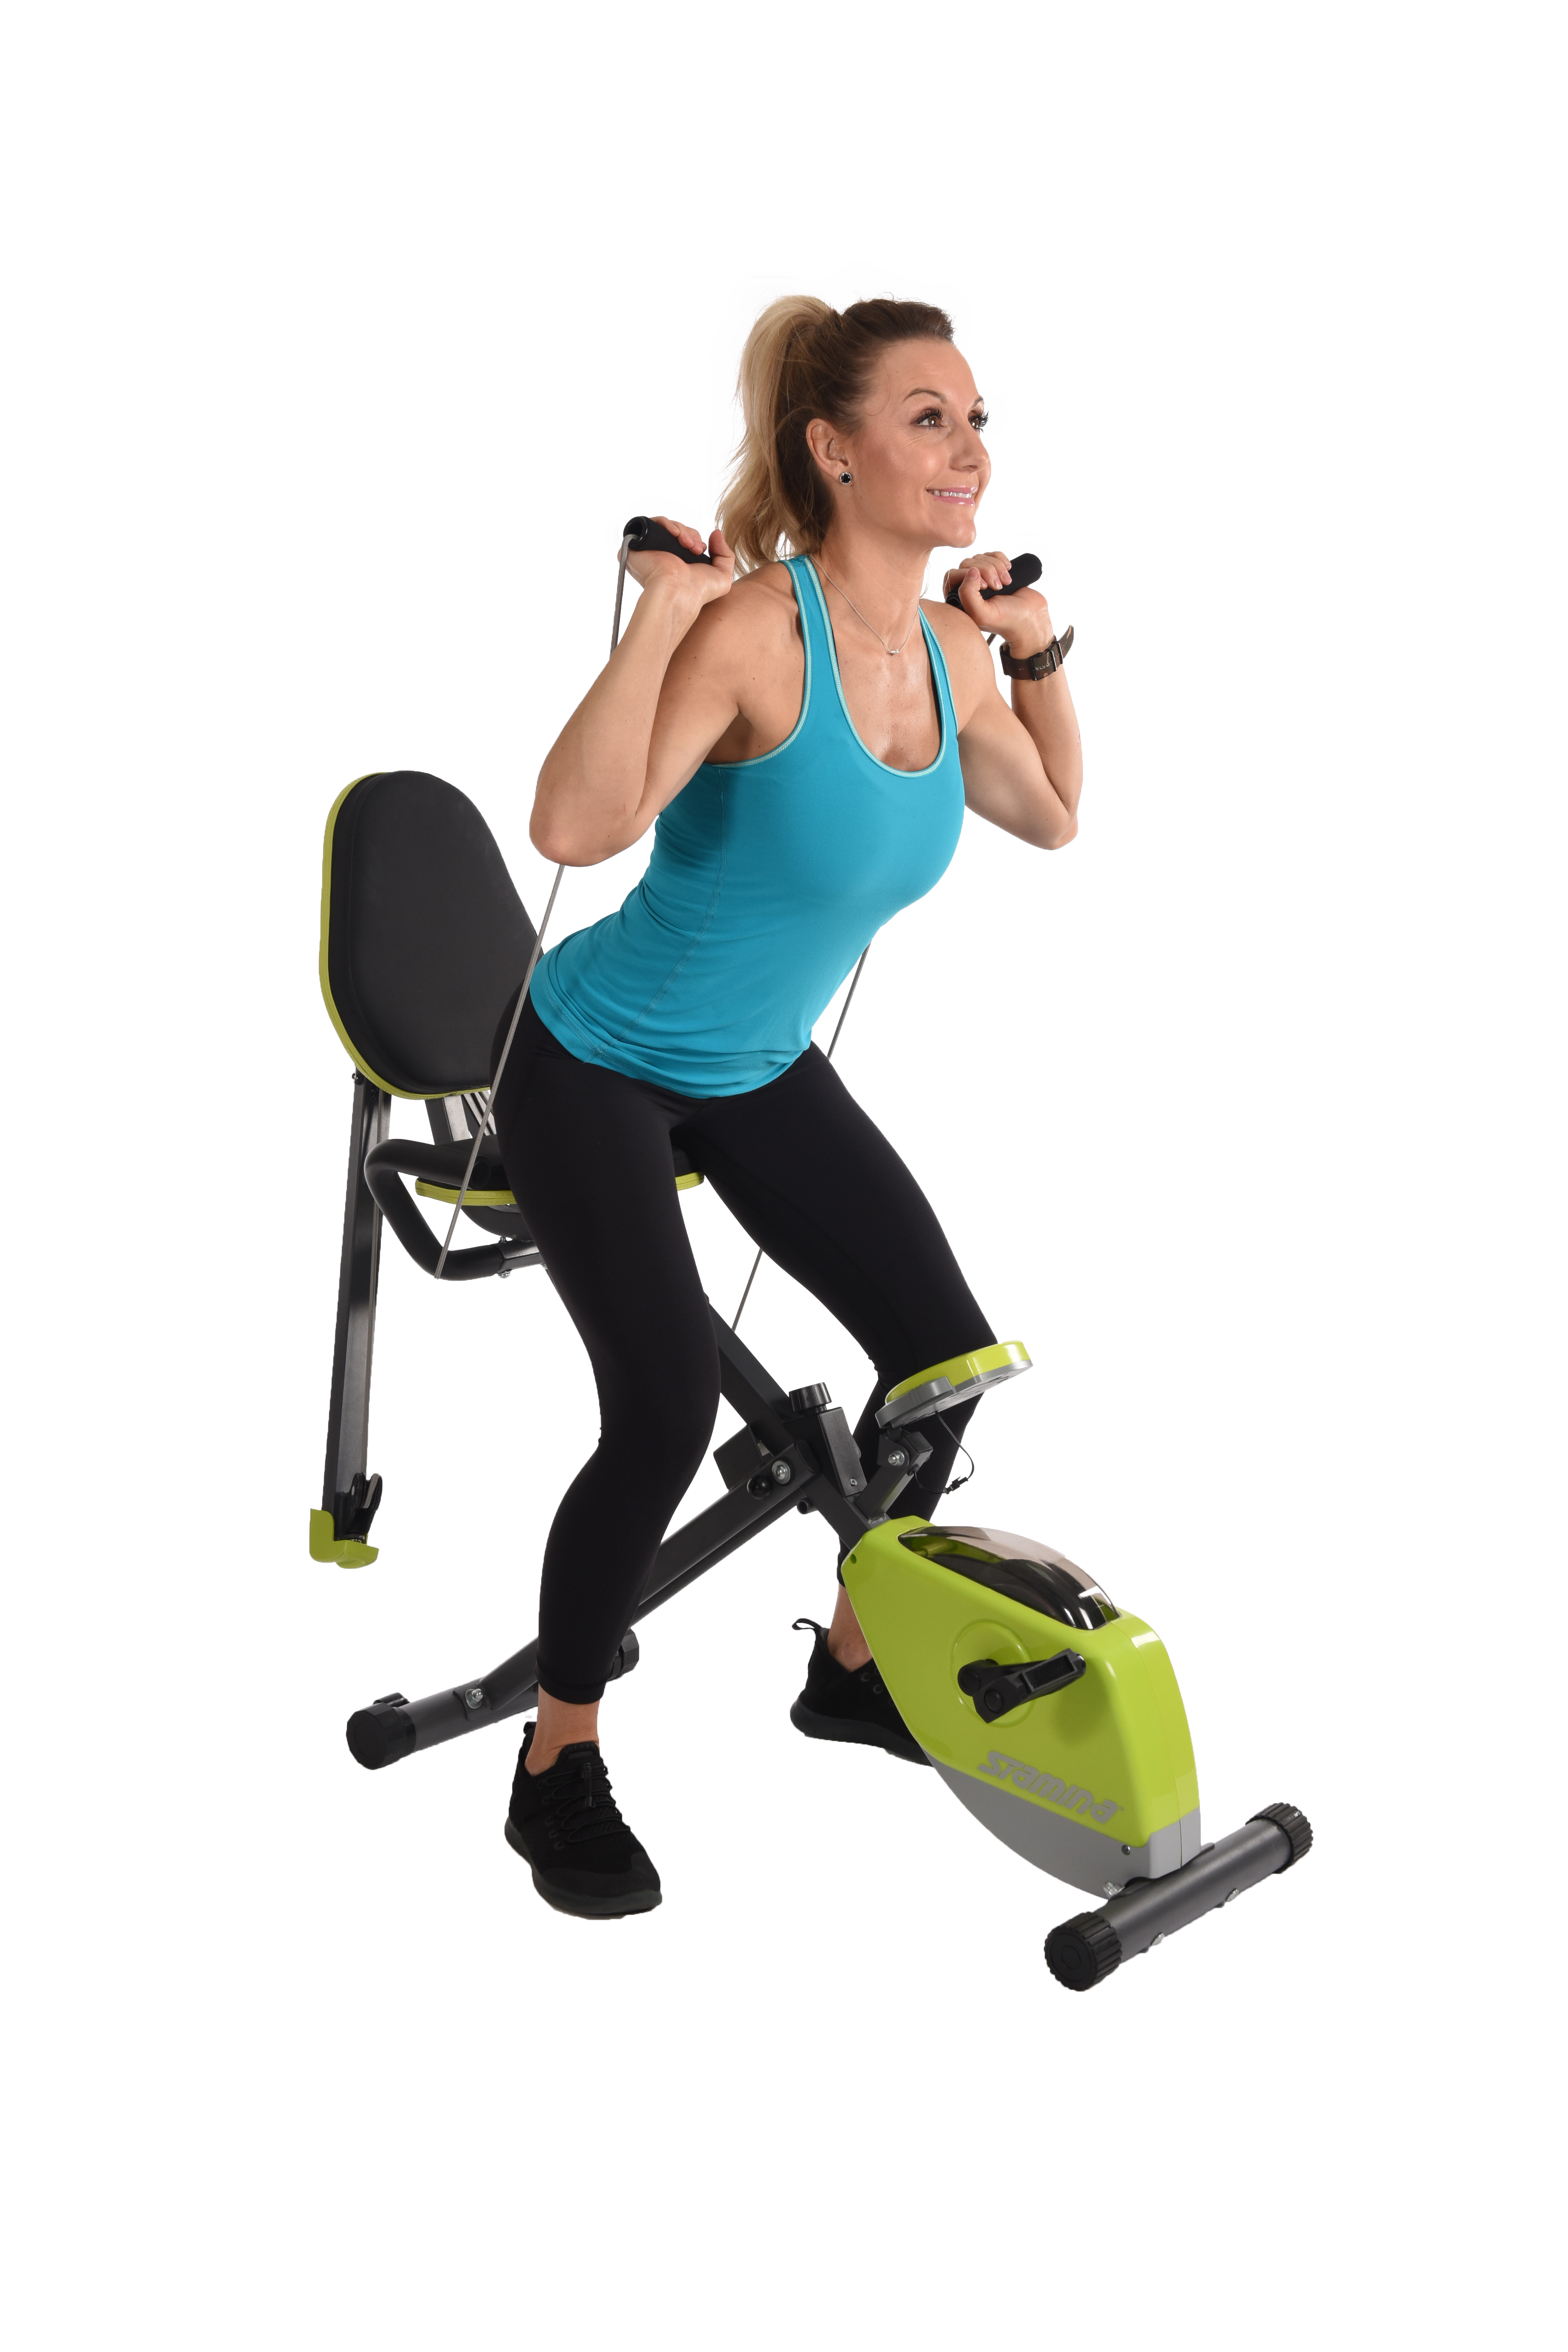 Performing squats holding handles on Stamina Wonder Exercise Bike With Strength System.